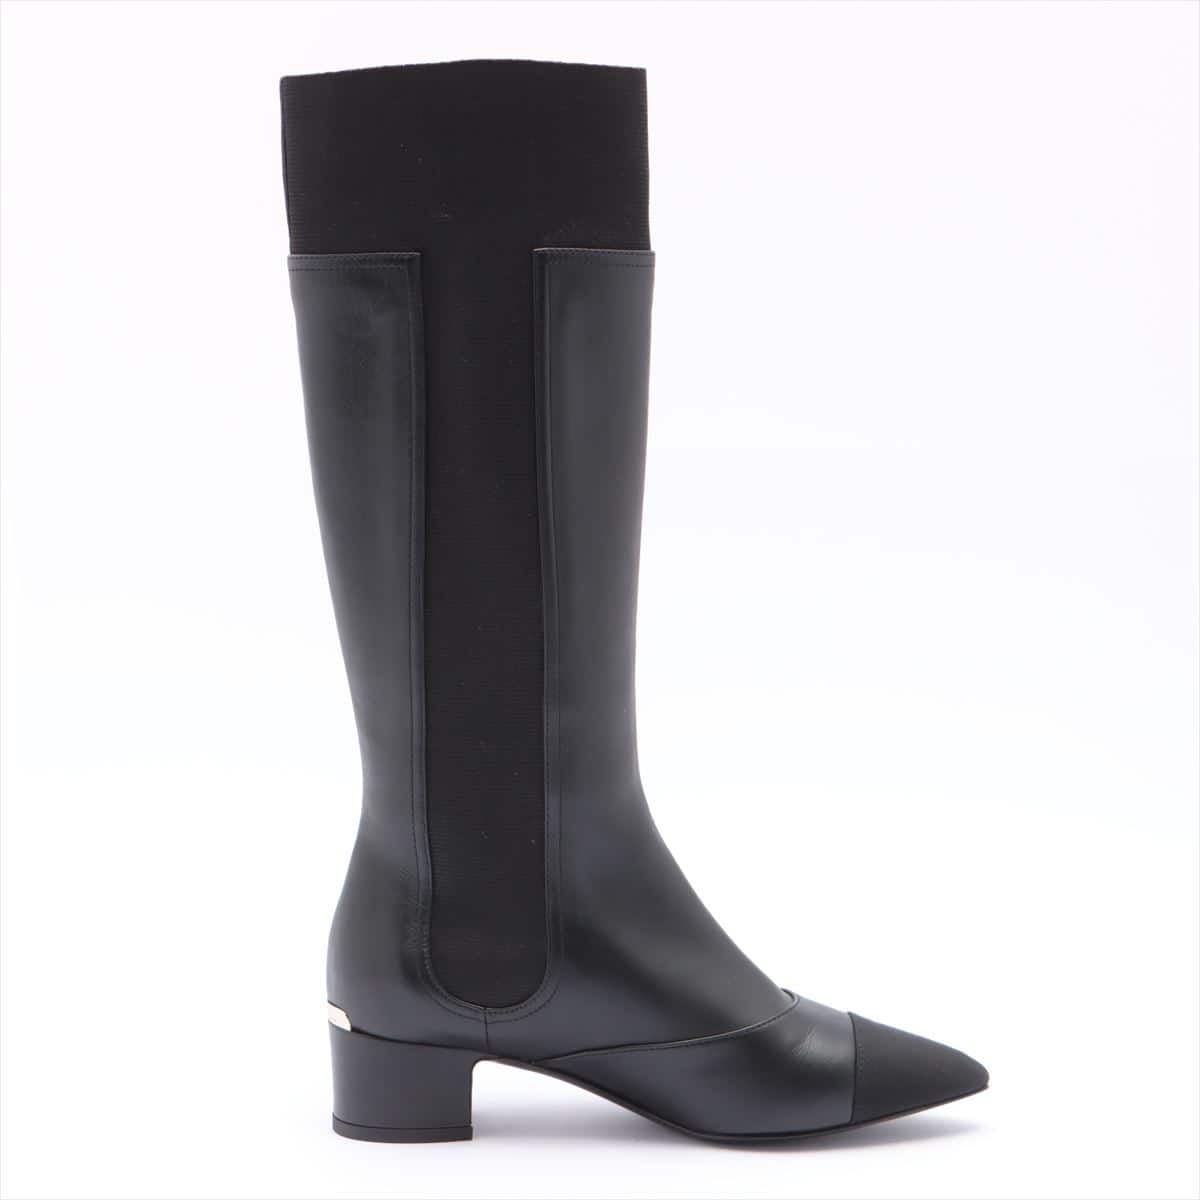 Chanel Leather Long boots 35 1/2 Ladies' Black